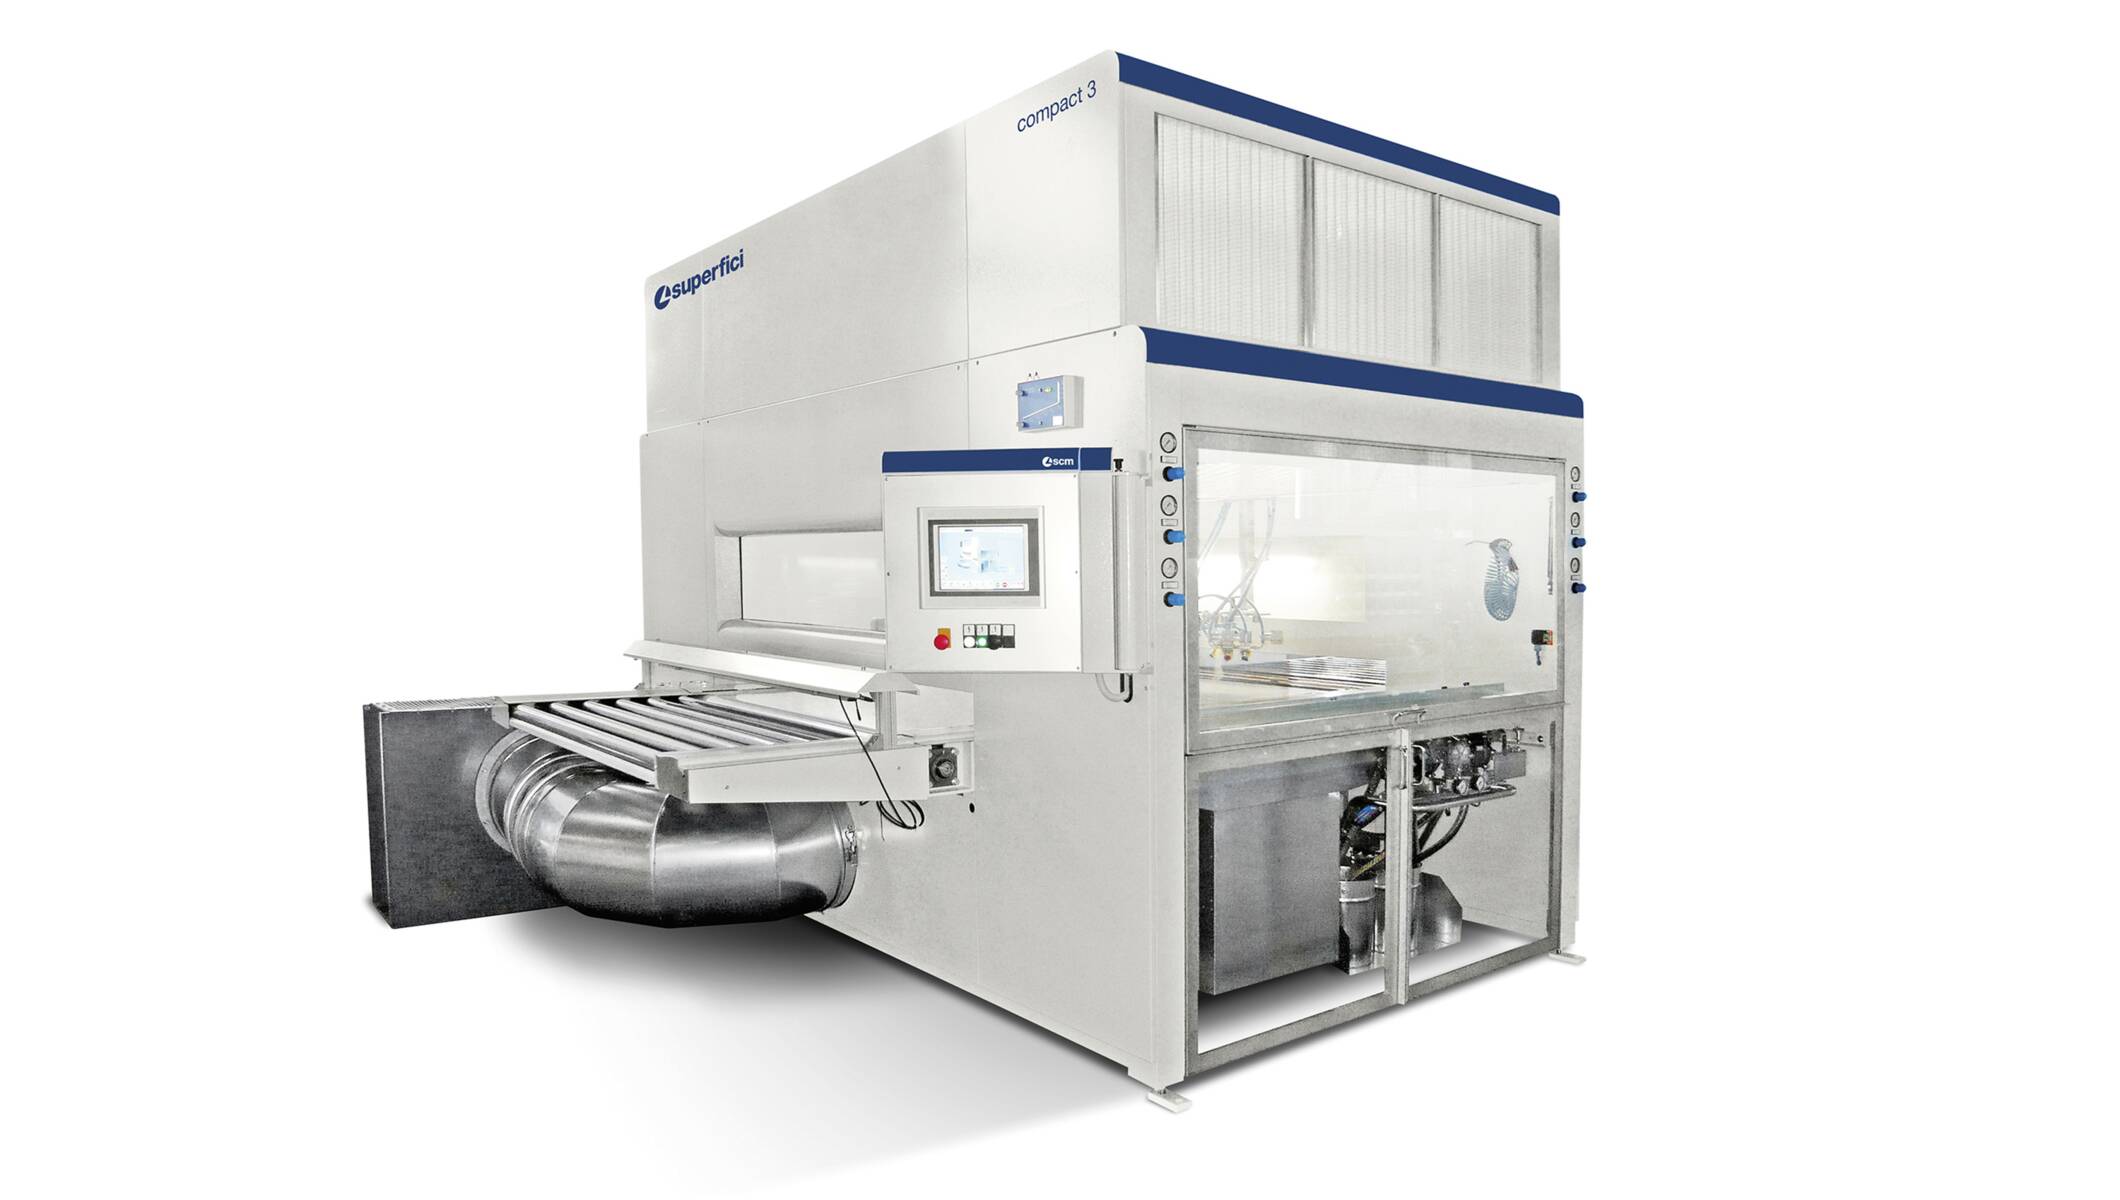 Finishing systems - Spraying machines - compact 3 r